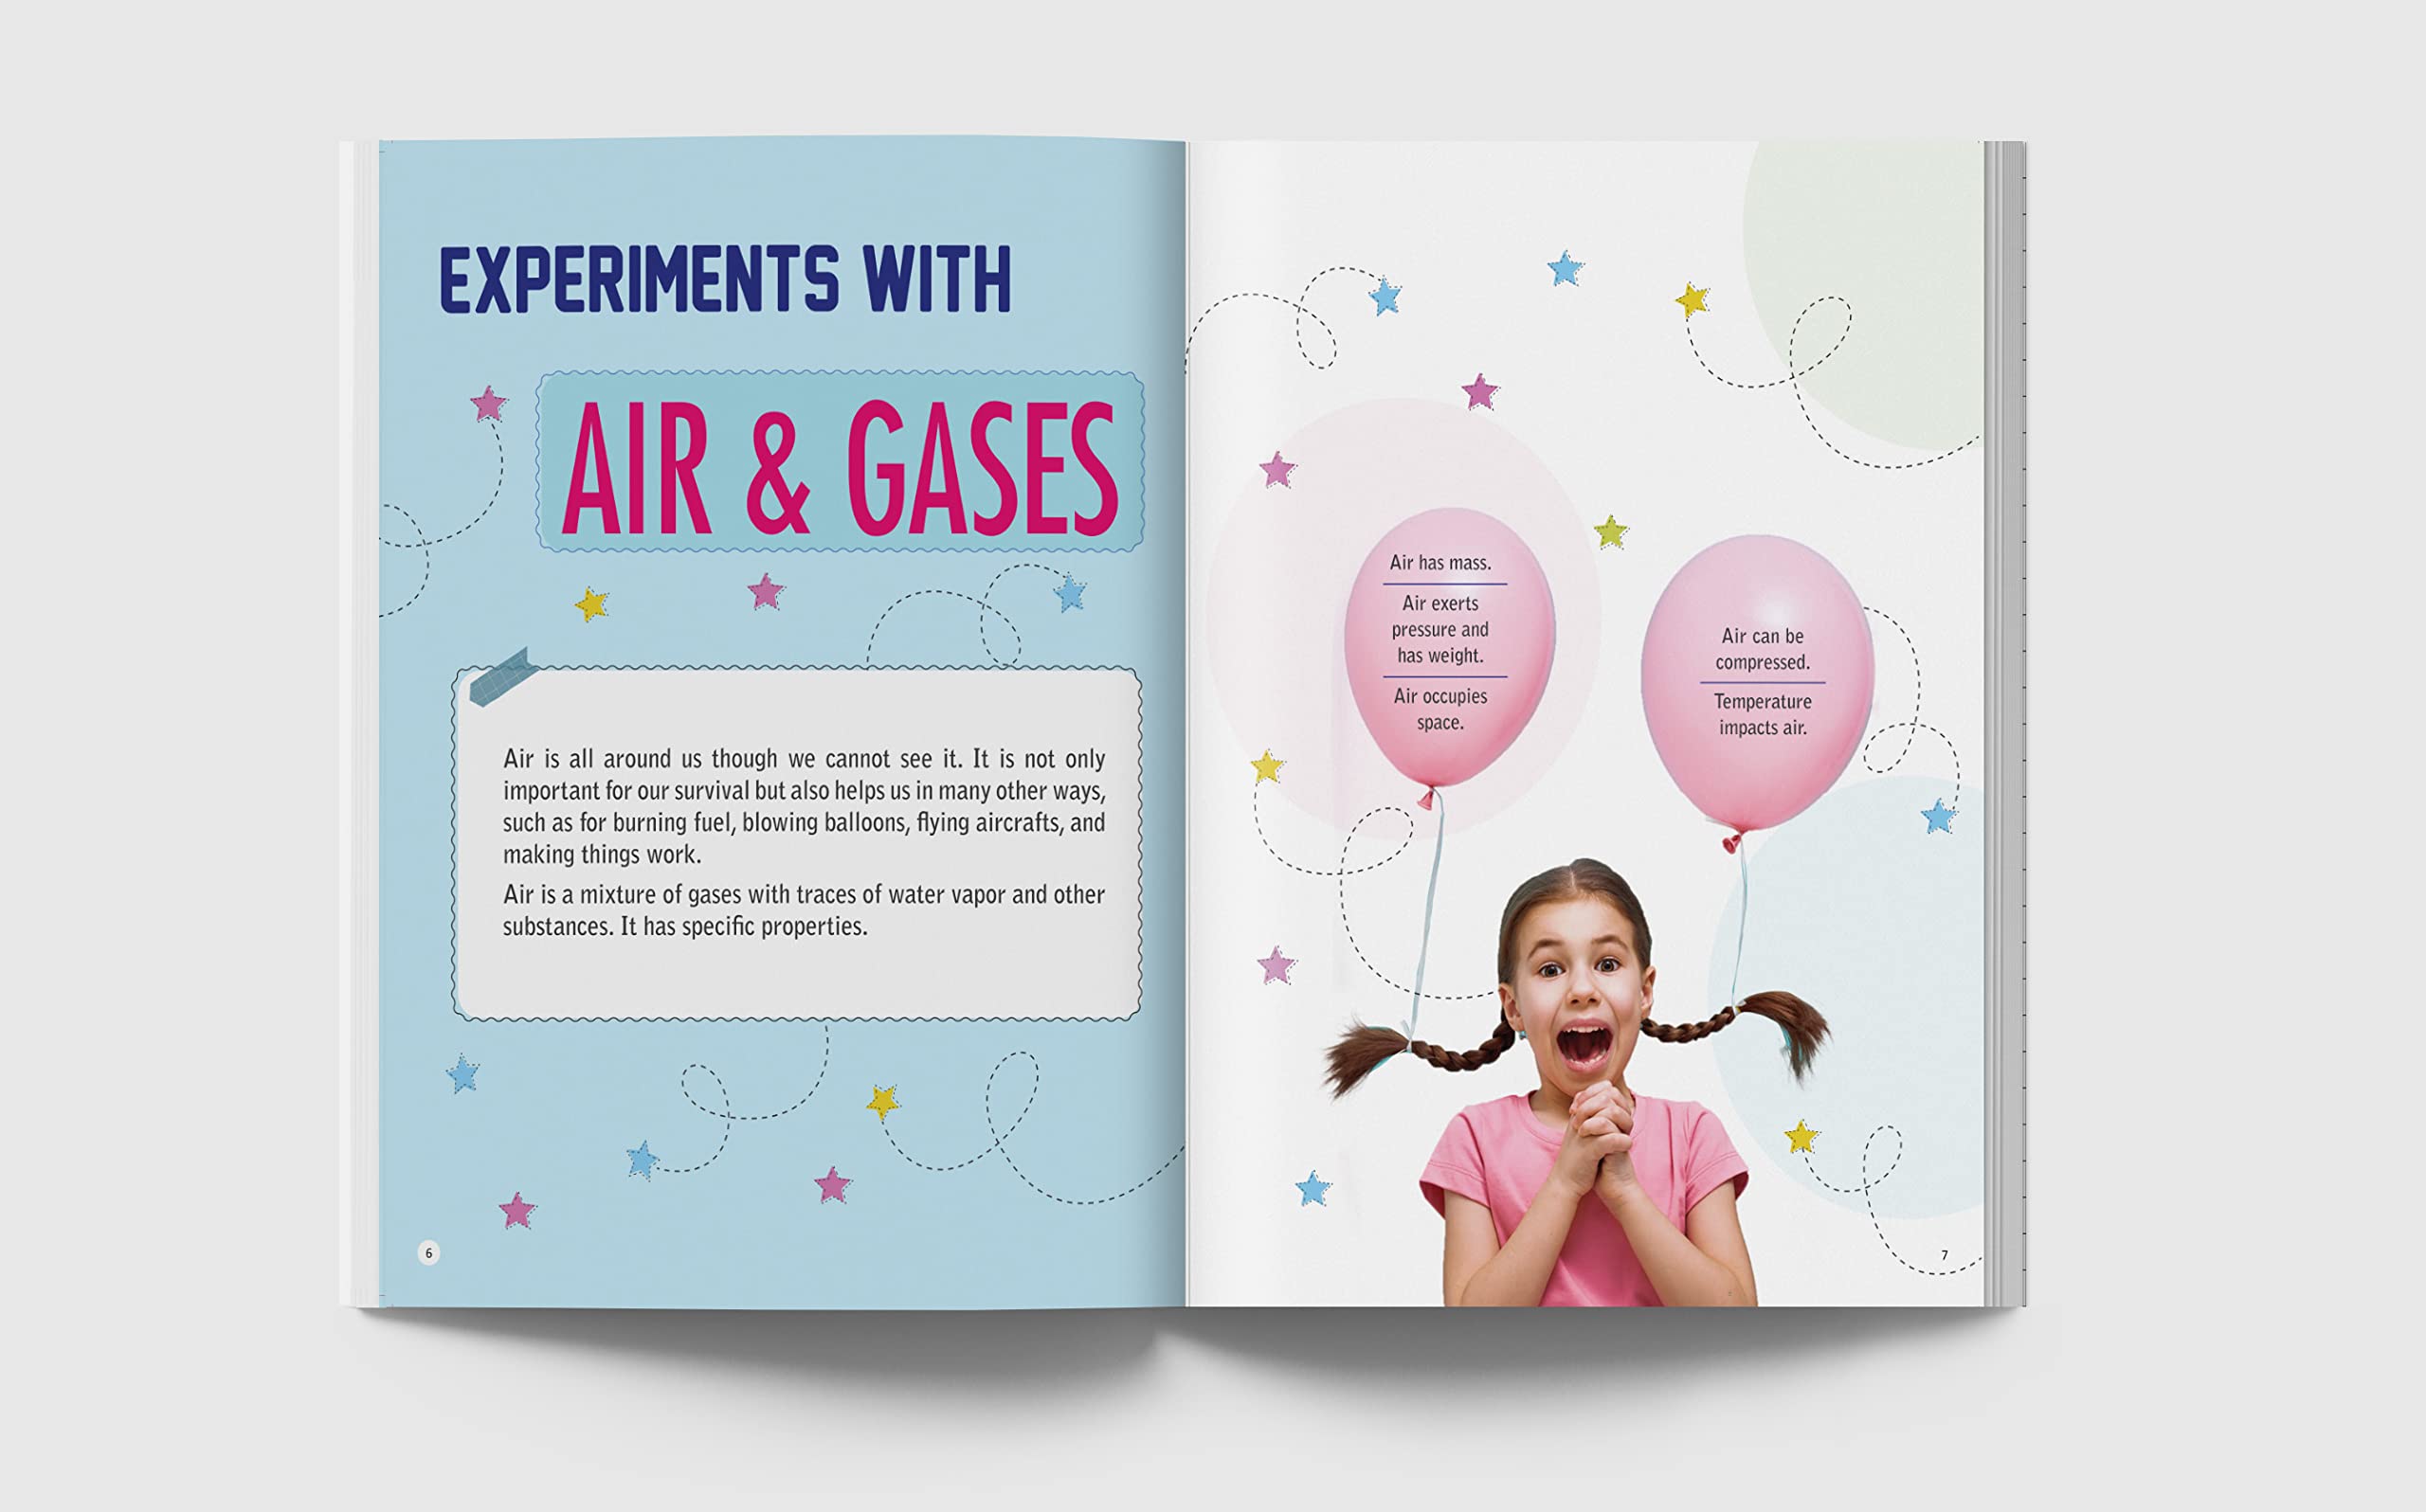 101 Science Experiments and Projects For Children (101 Fun Activities)